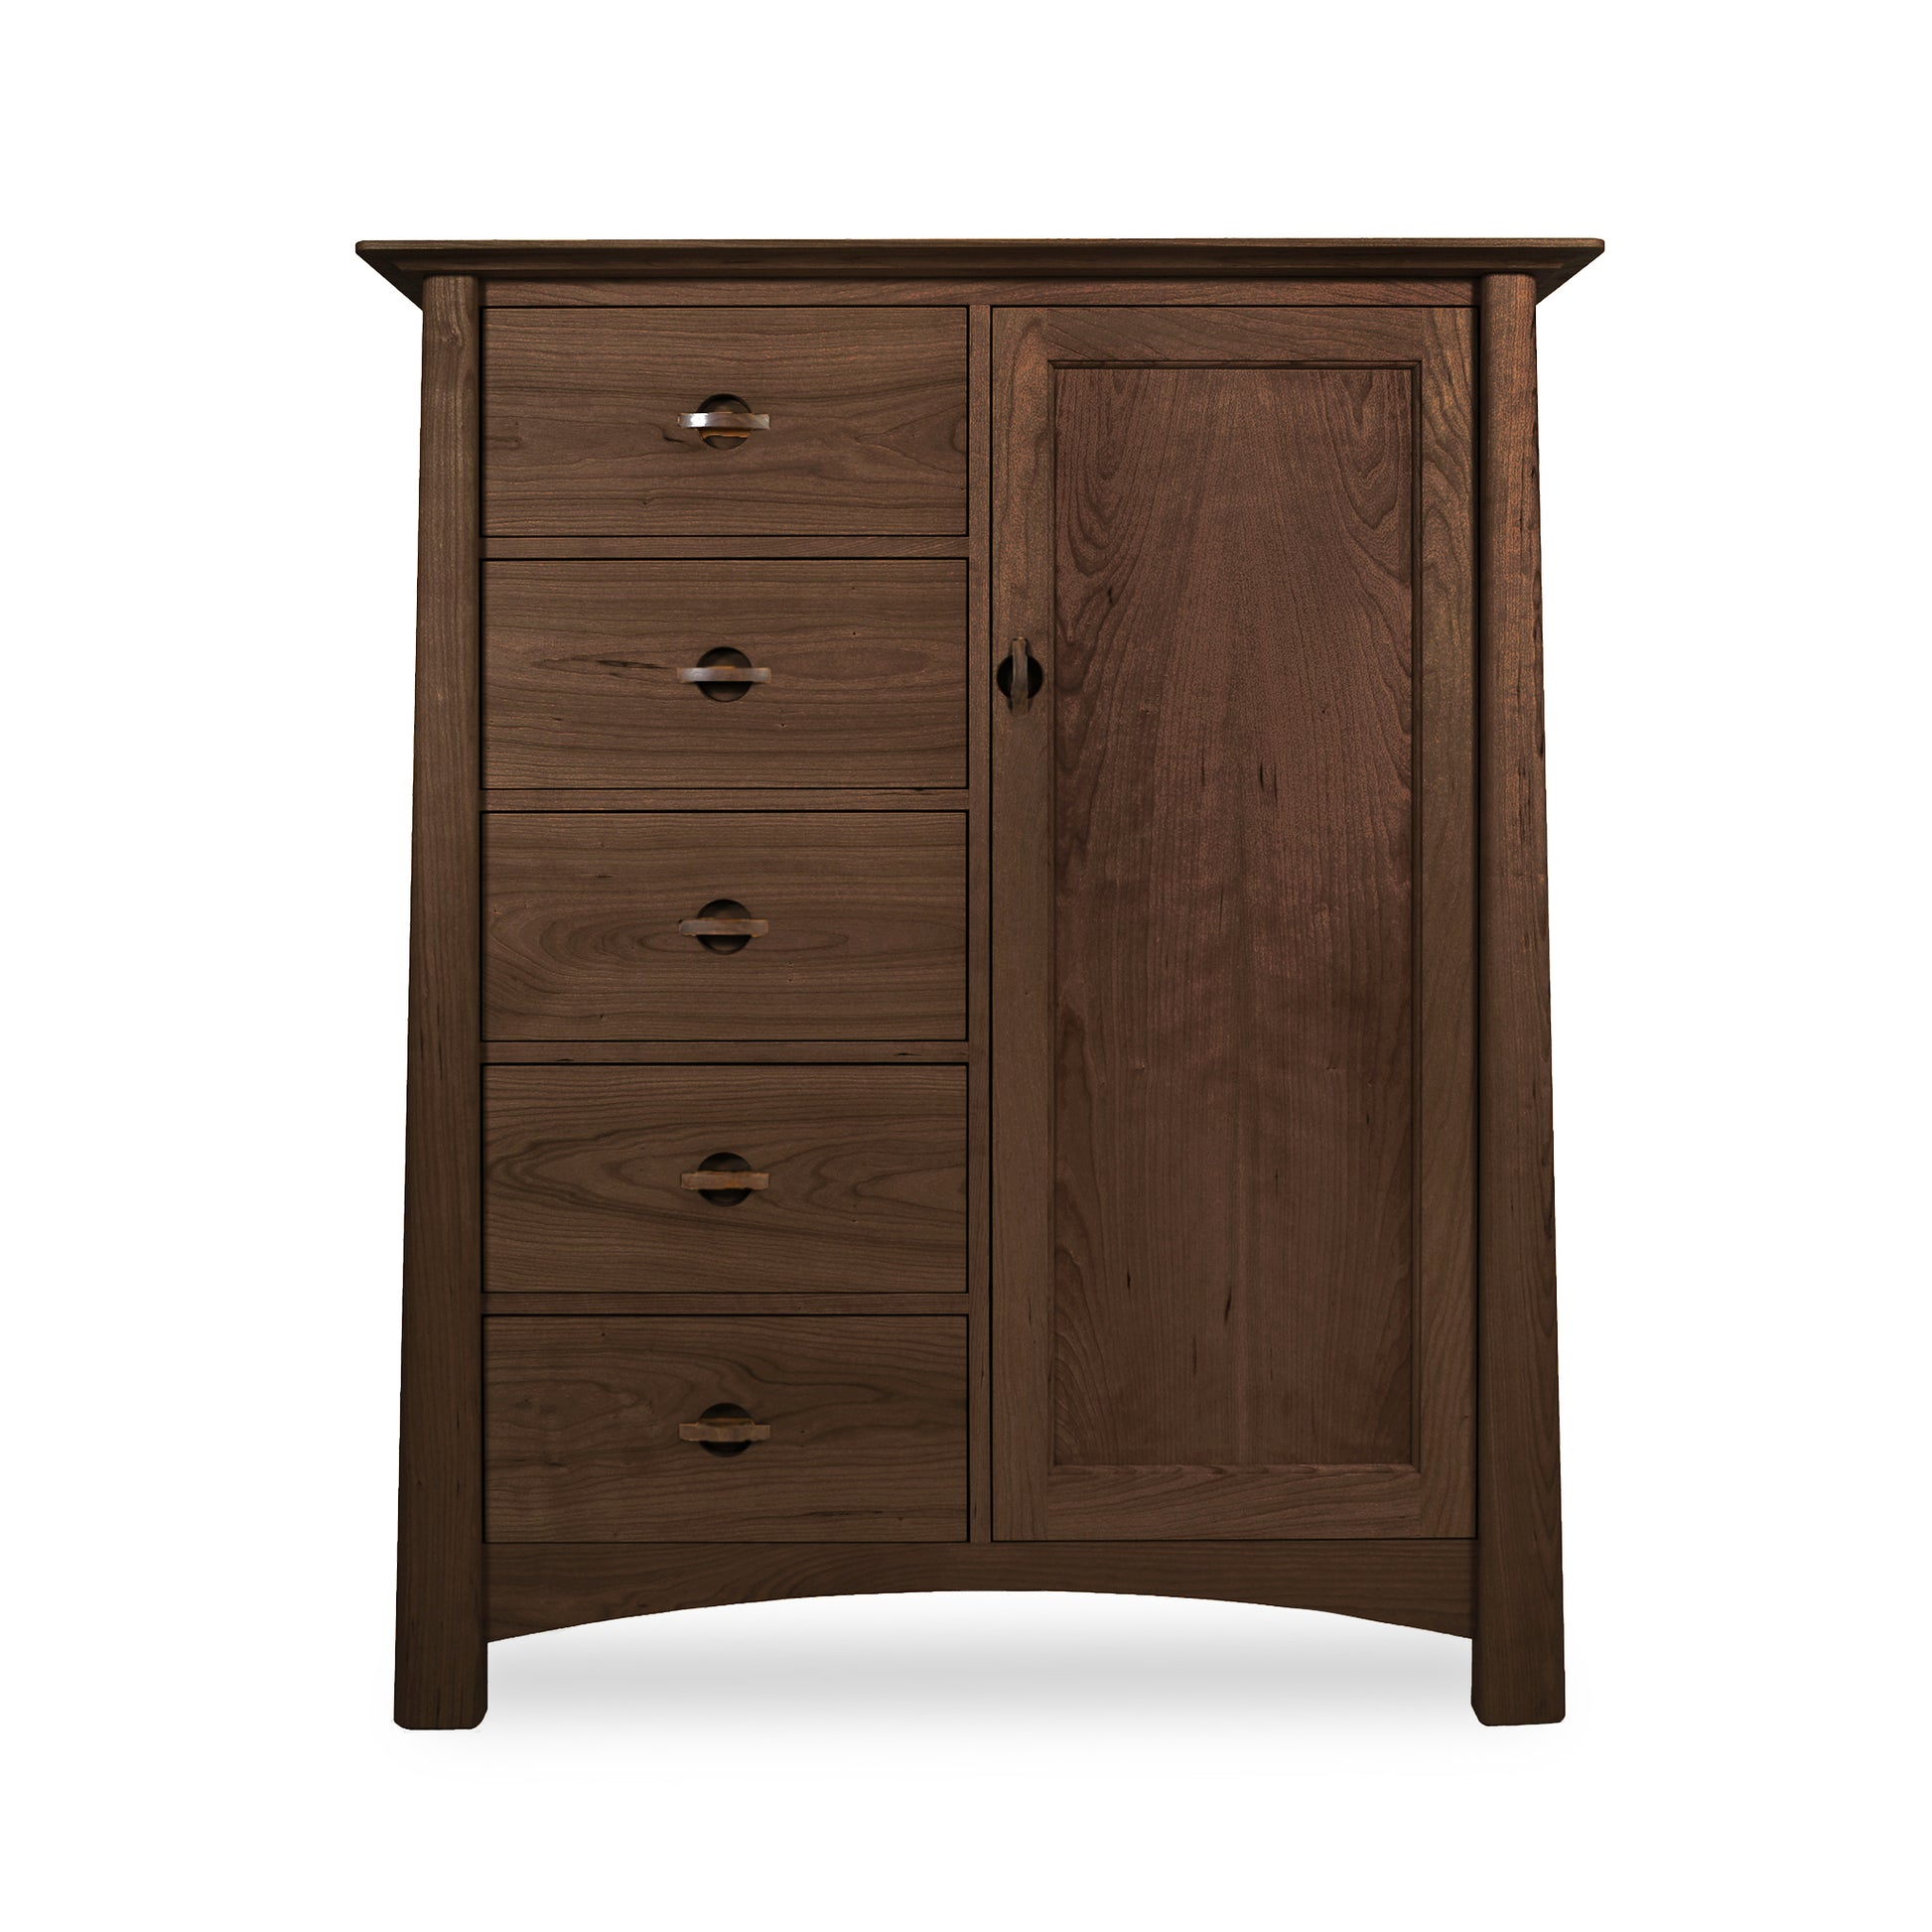 A Cherry Moon Sweater Chest by Maple Corner Woodworks with an eco-friendly oil finish featuring three drawers on the left side and a single door on the right, all with round handles, set against a white background.